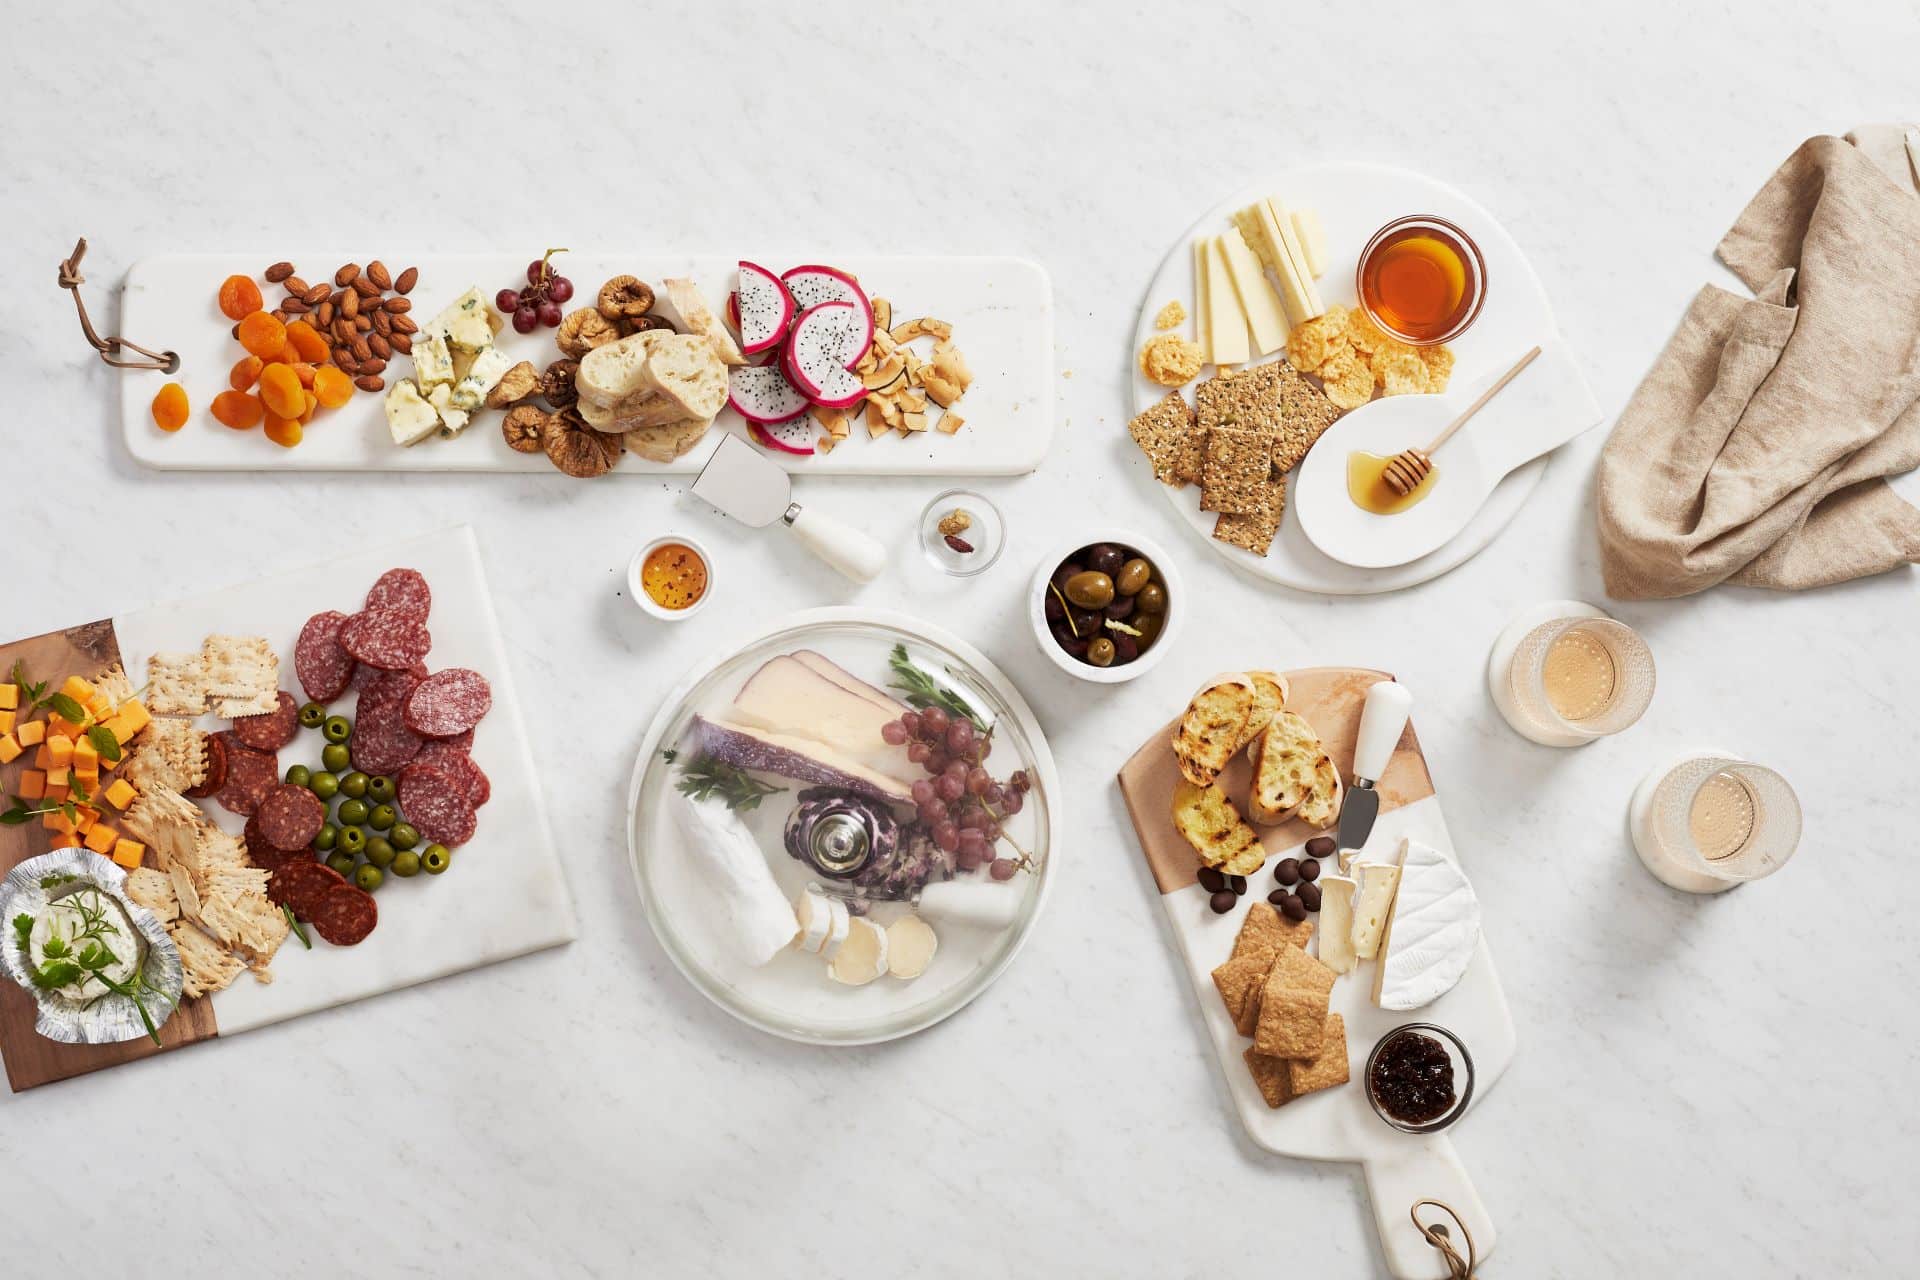 Tips for Putting Together A Charcuterie Board